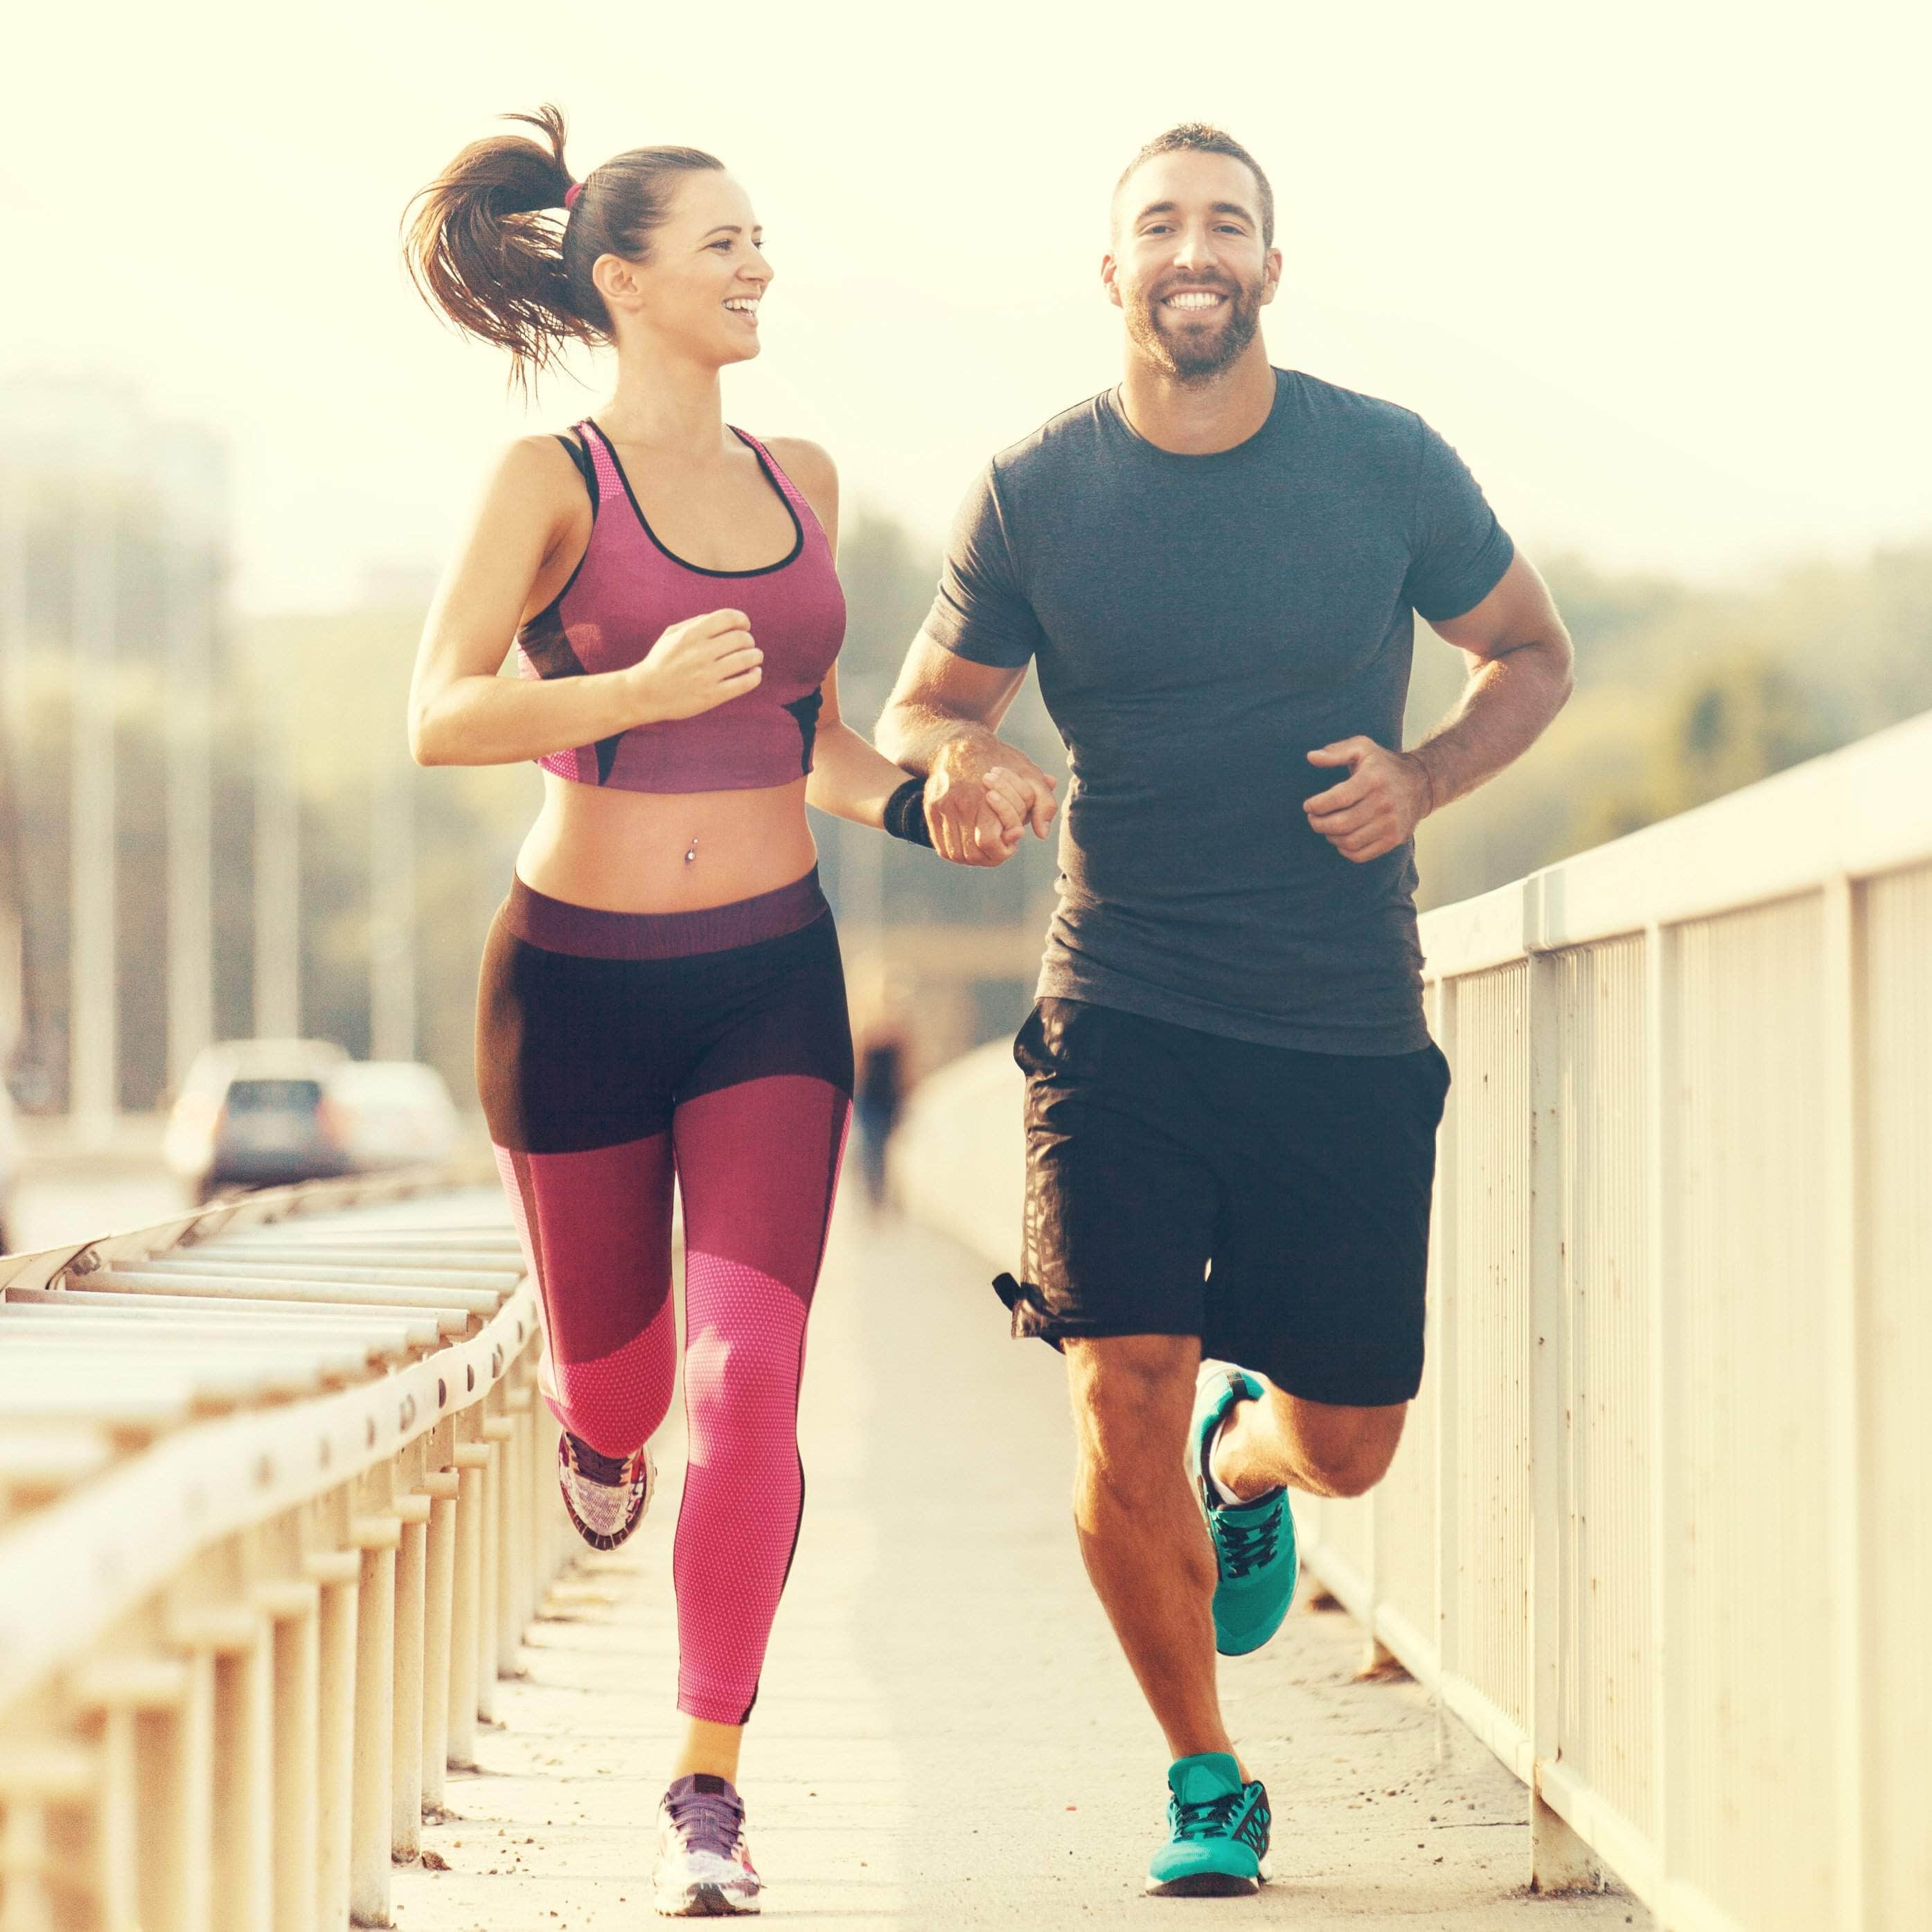 The New Study That Says Running Makes You Live Longer